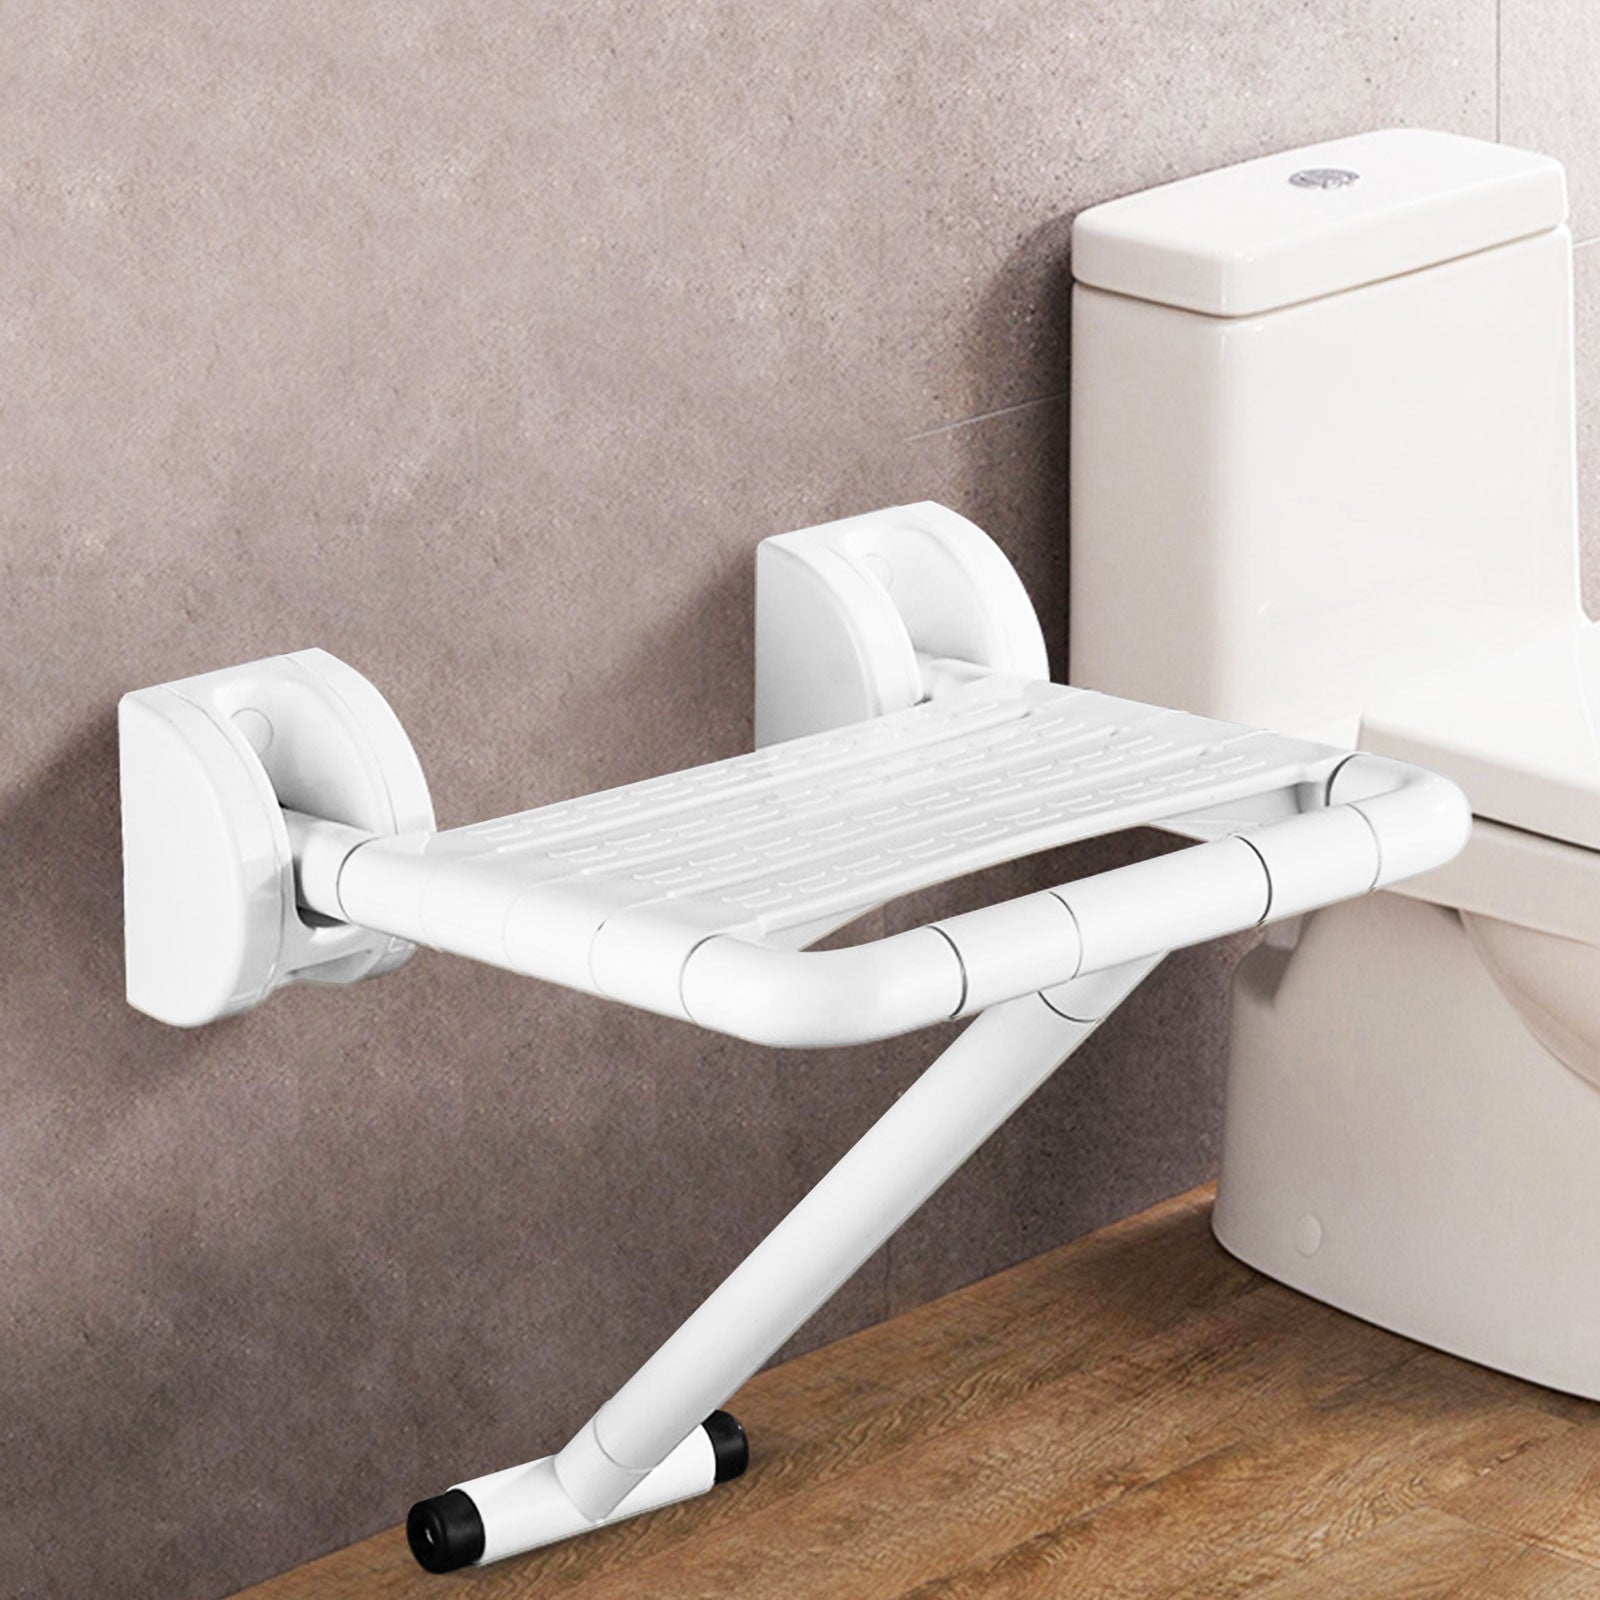 Shower Wall Seat, Fold Up Seat For Shower Fold Down Seat